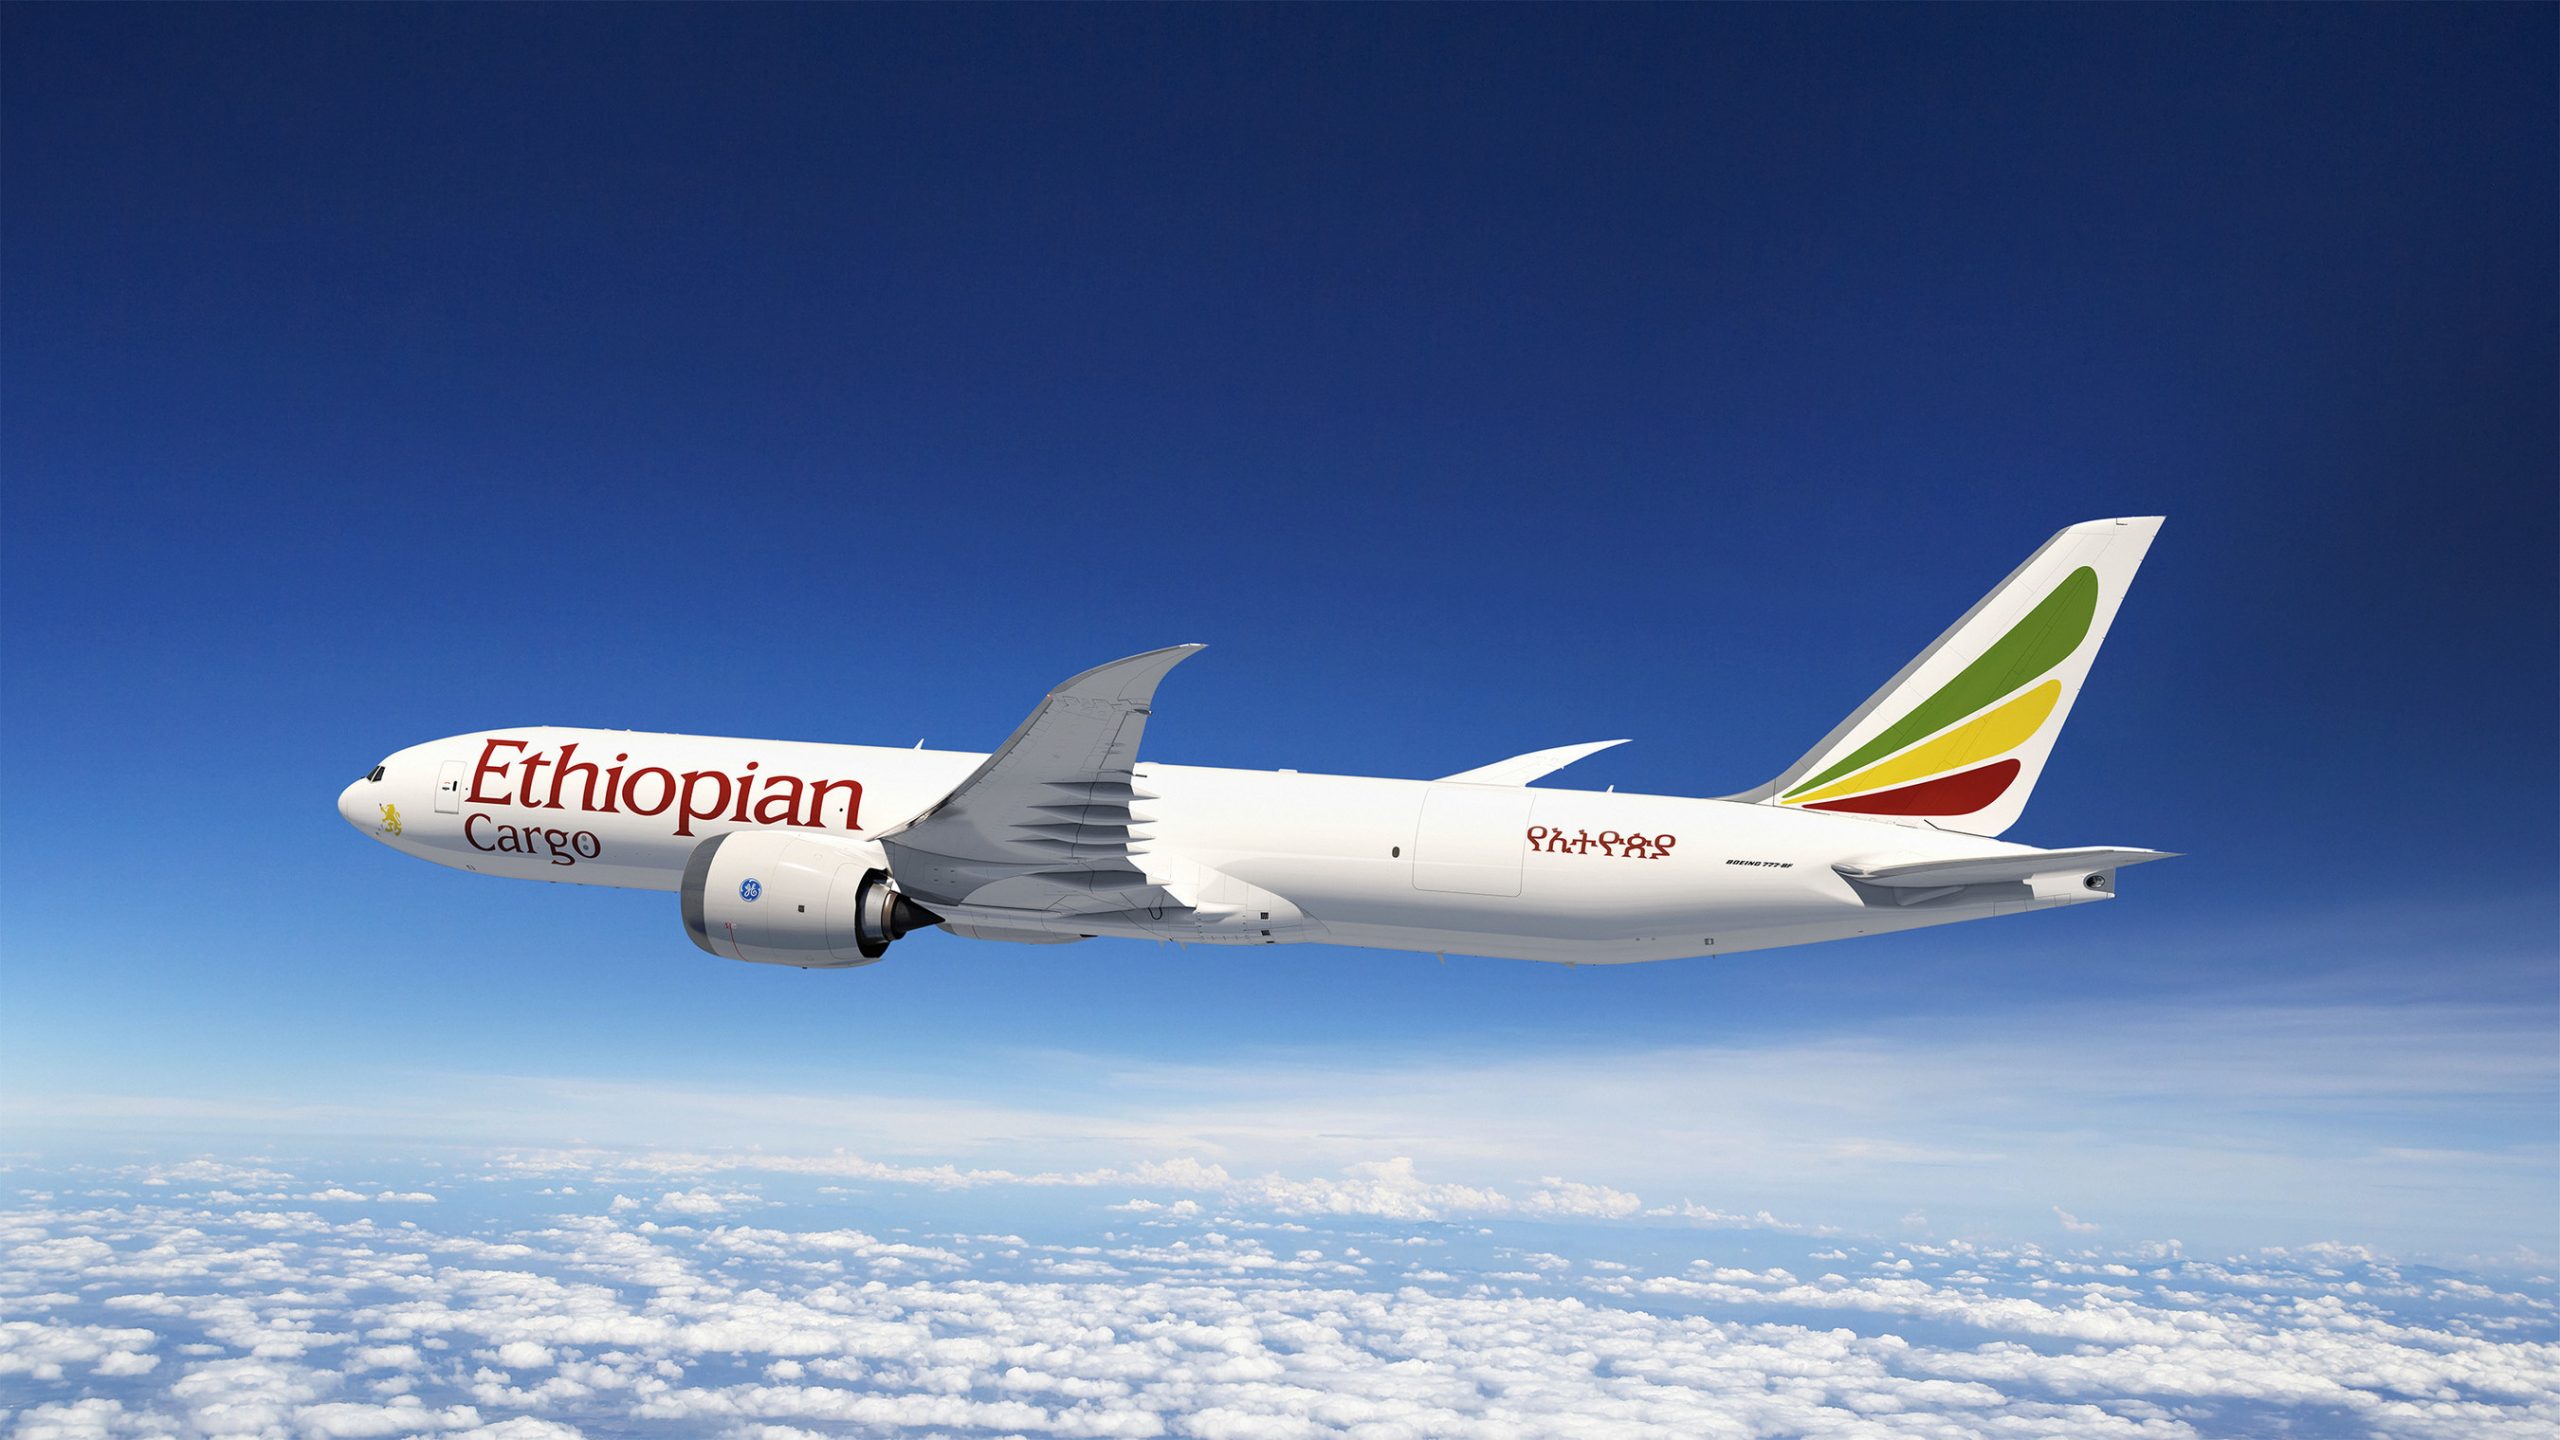 Boeing And Ethiopian Airlines Sign Memorandum Of Understanding For New 777 8 Freighter Airline